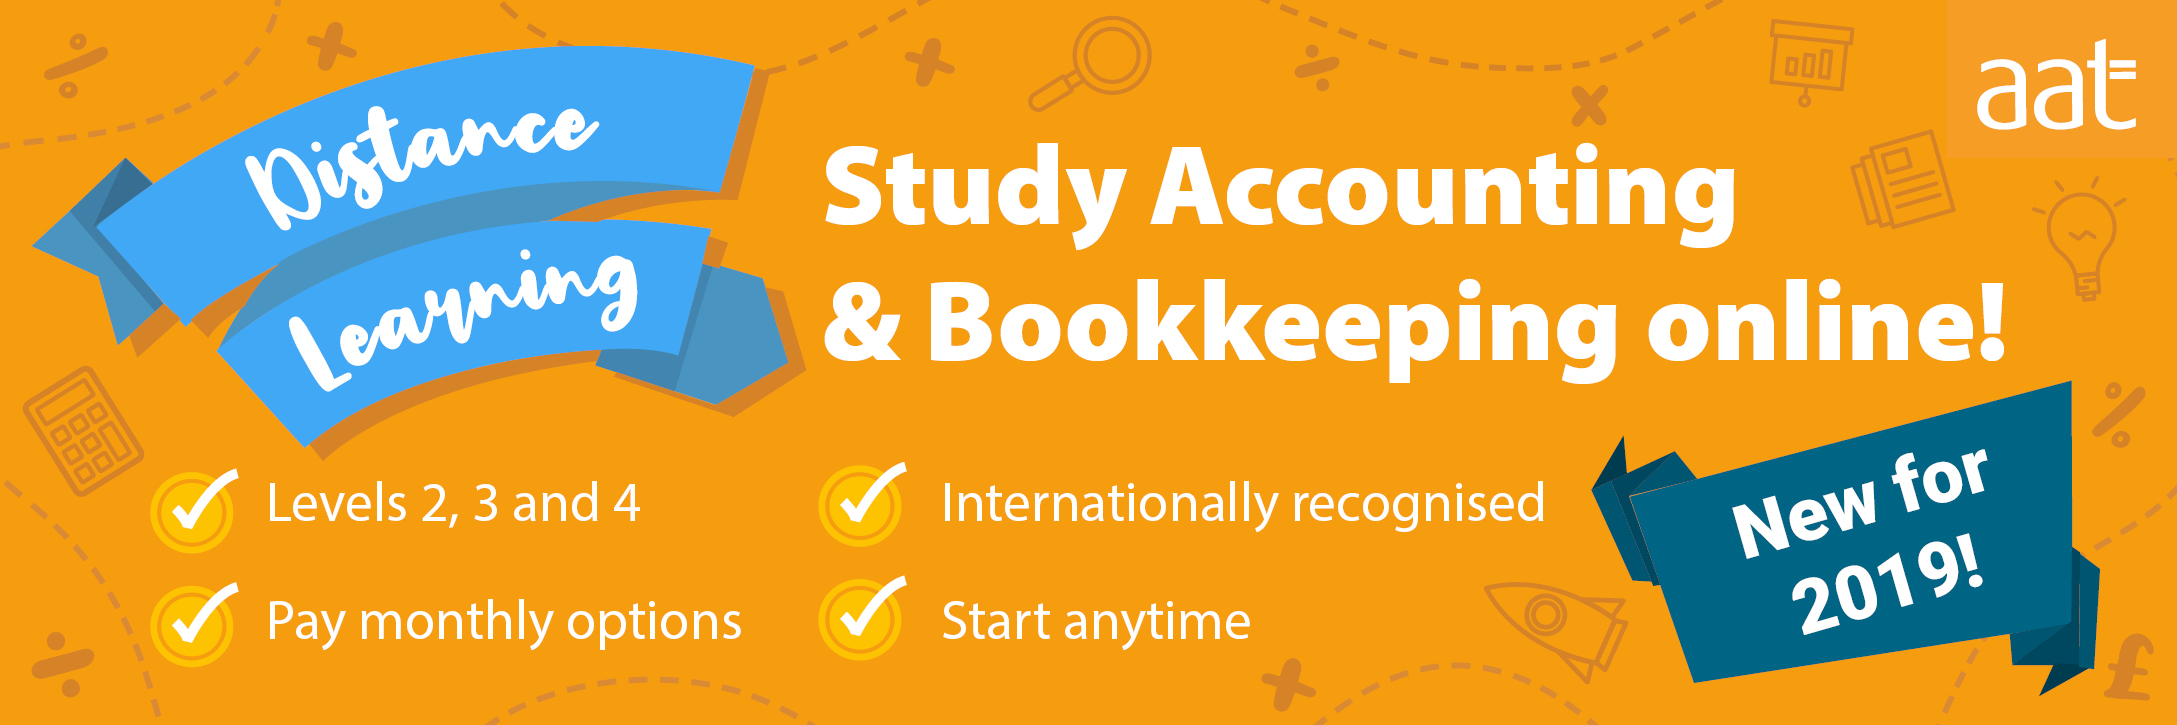 bookkeeping accounting banner